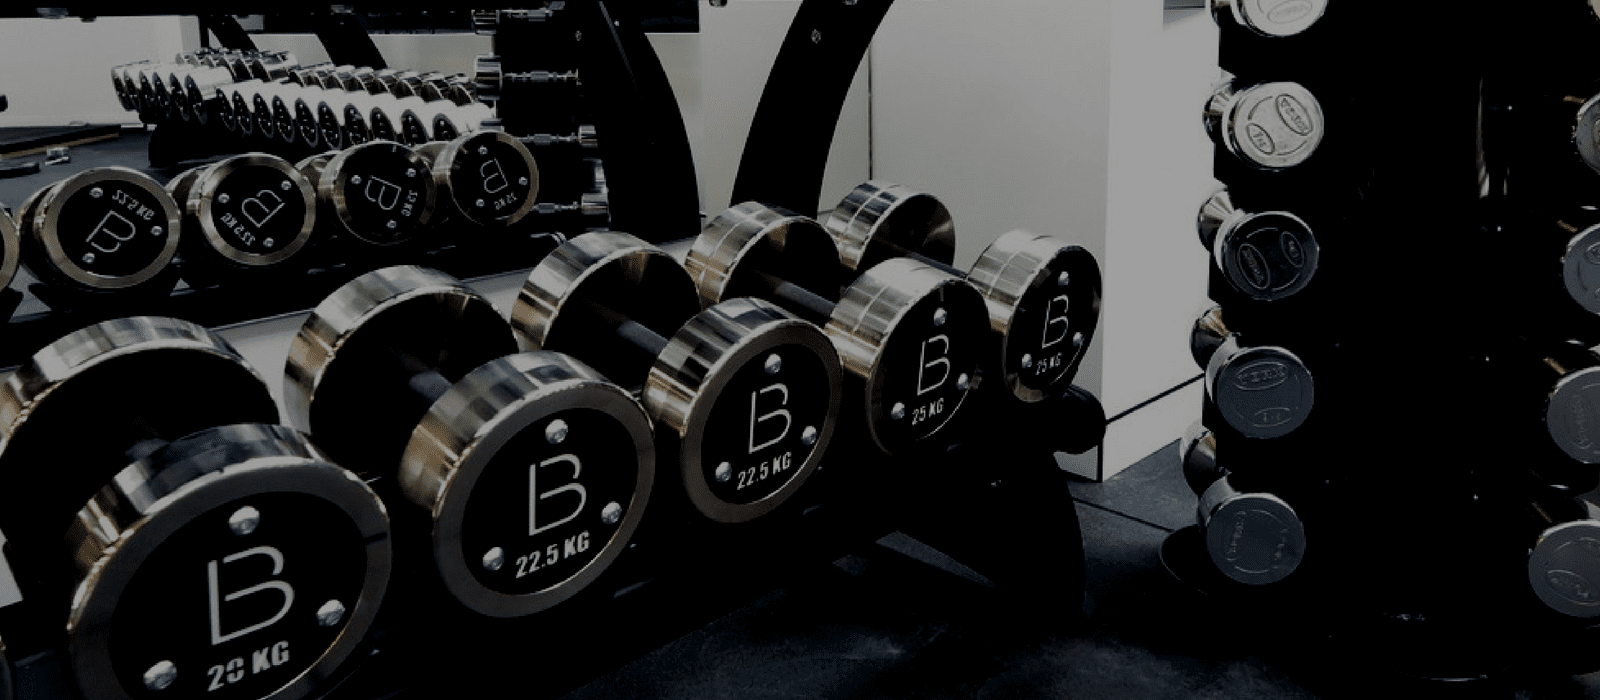 GYM – PHASE 1 DAY 3 STRENGTH DAY